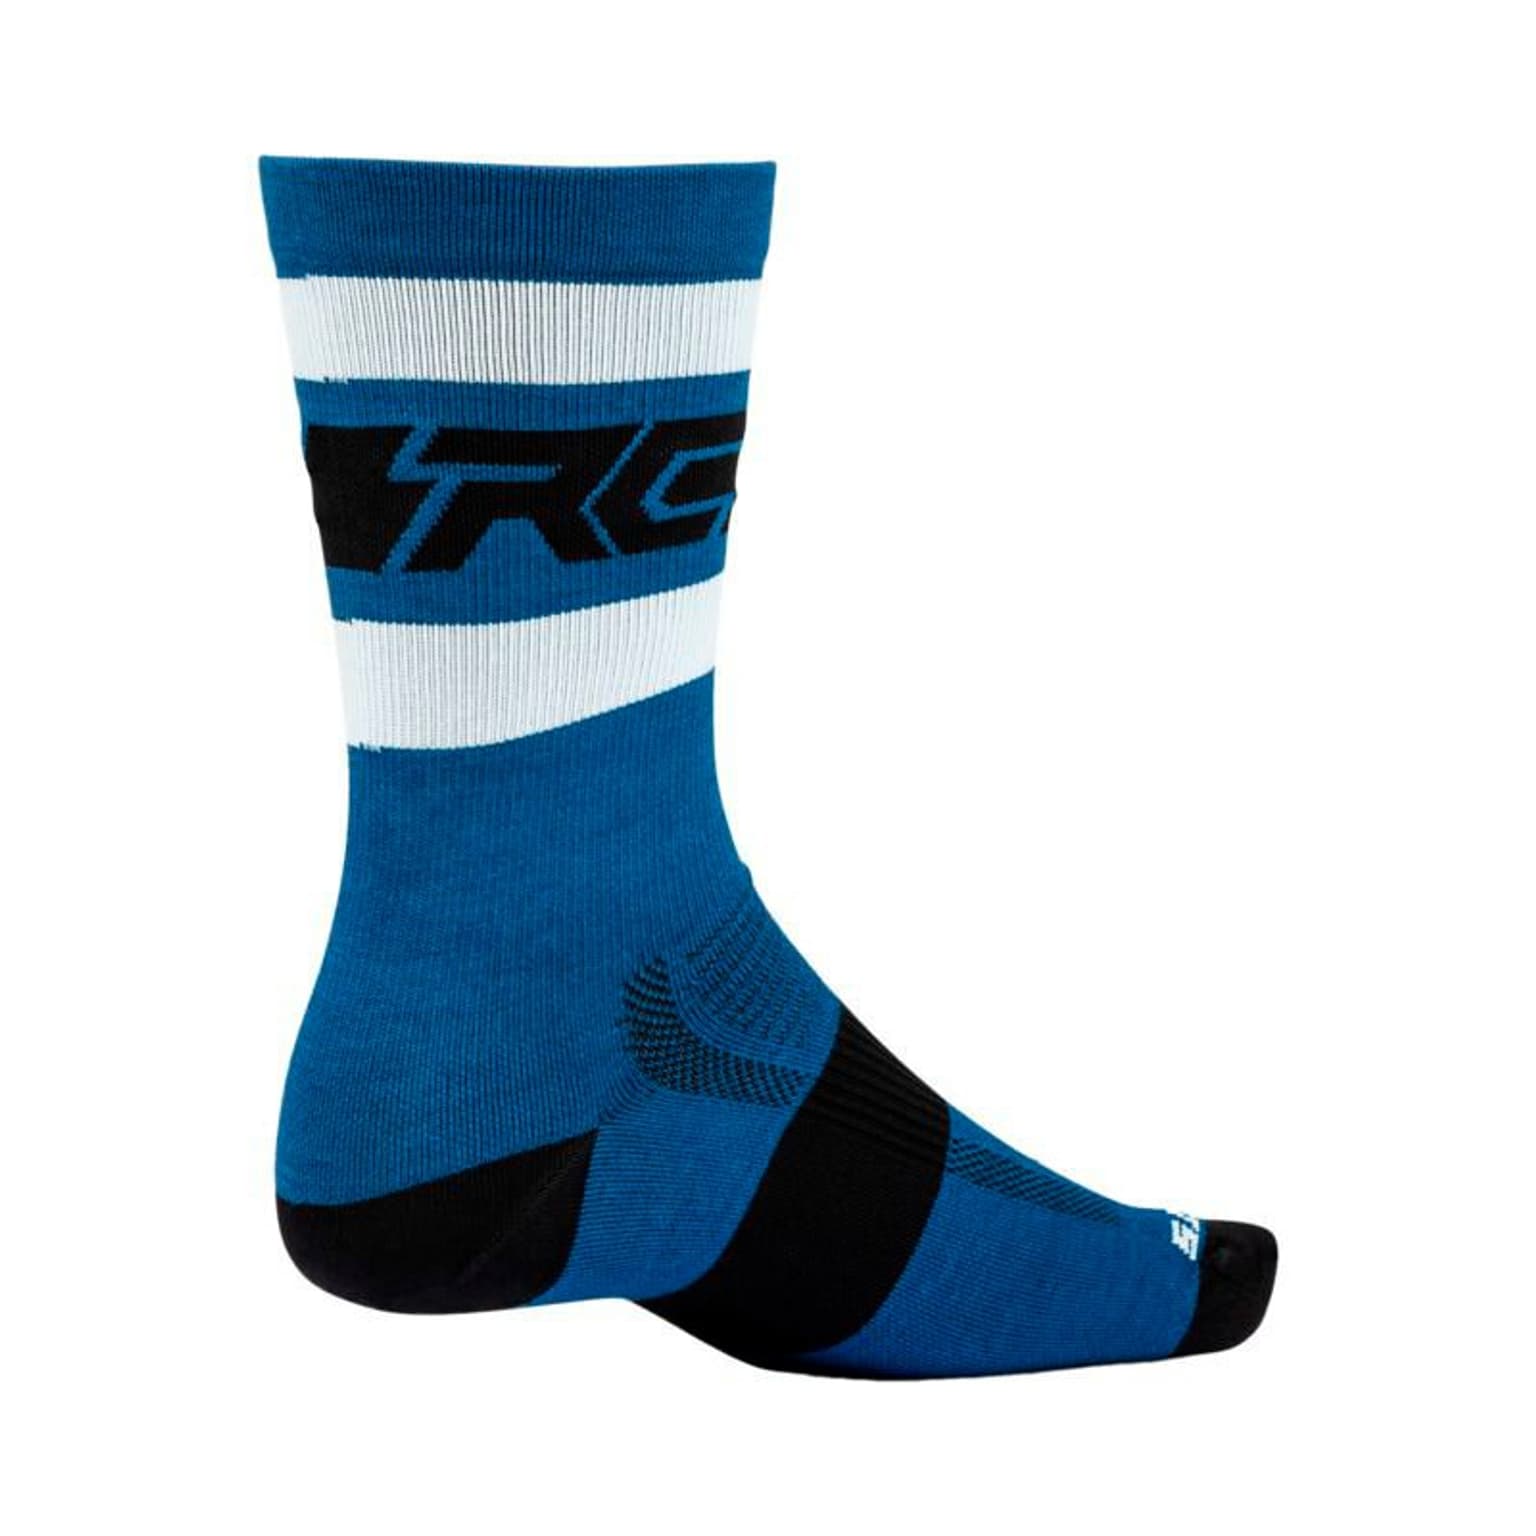 Ride Concepts Ride Concepts Woll Fifty-Fifty Velosocken bleu 2